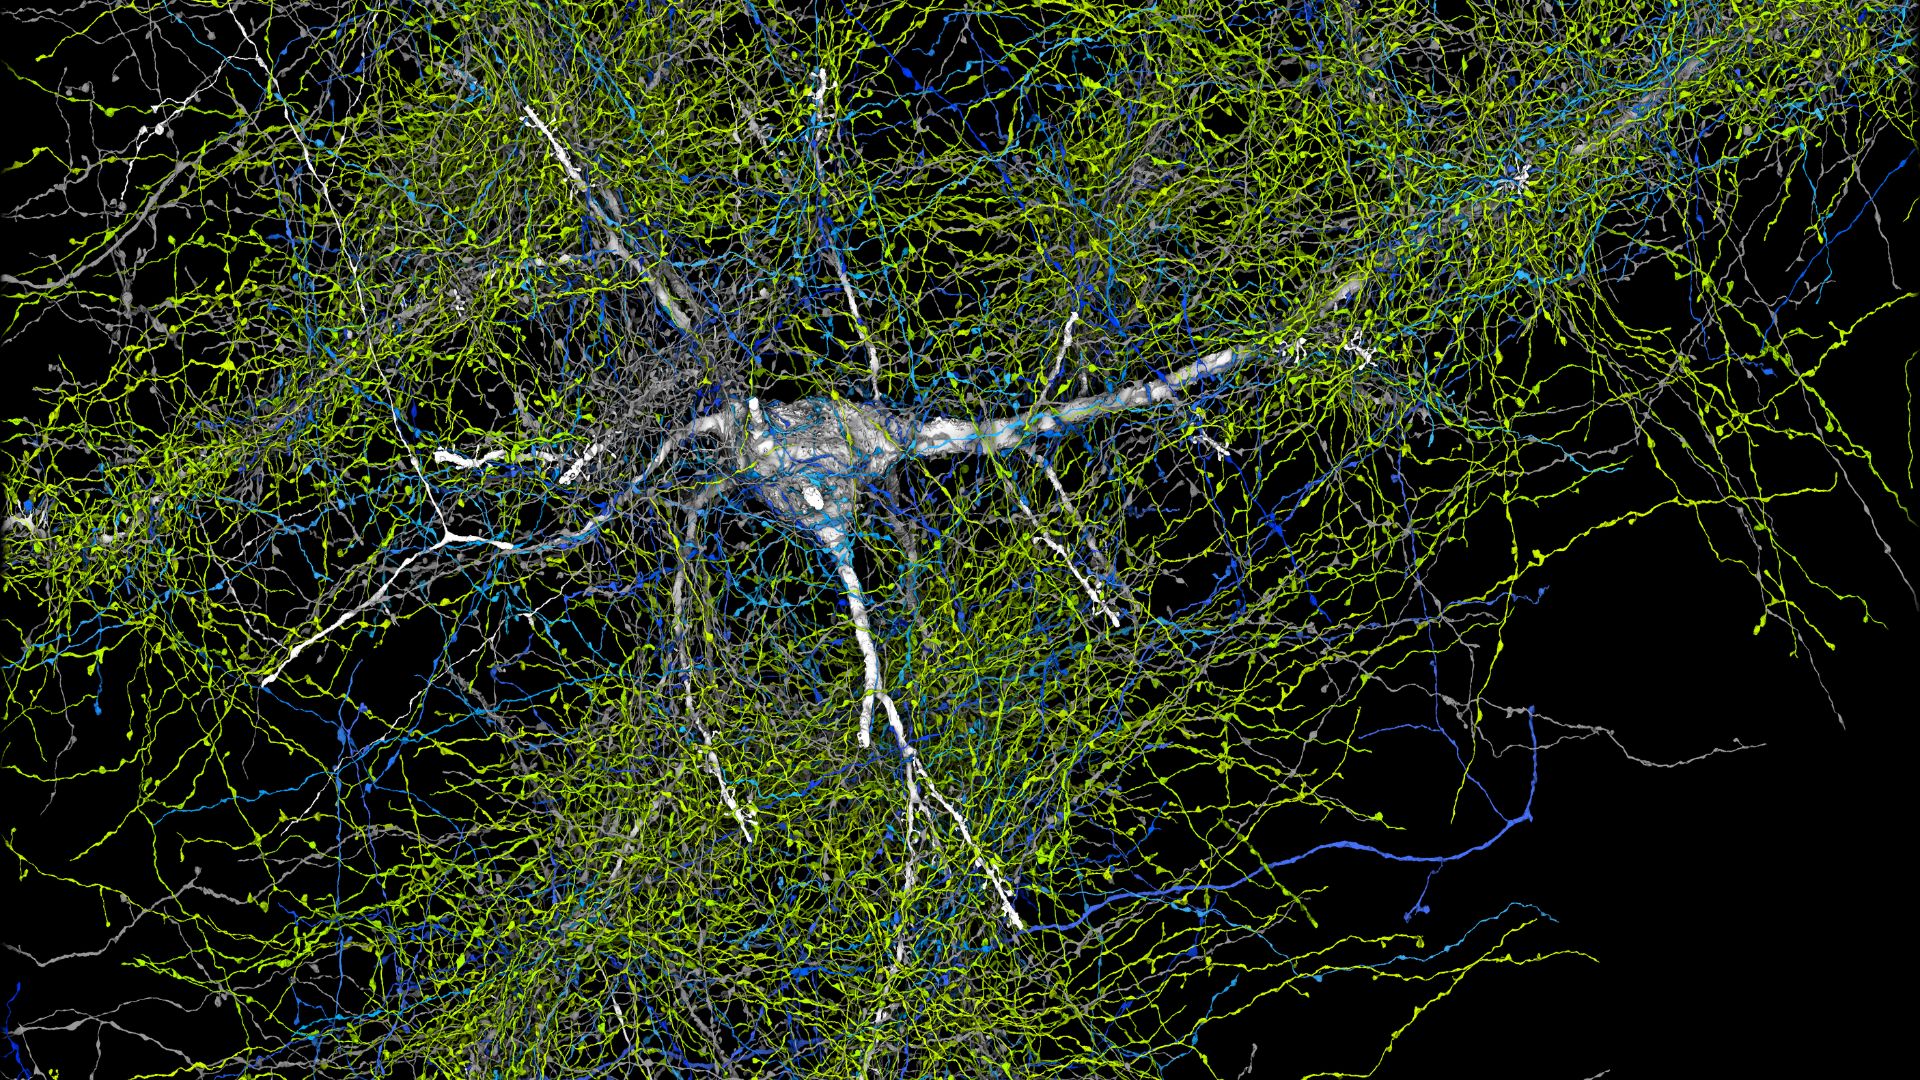 Digital image of a neuron shown in white connected to many greena and blue synapses surrounding it